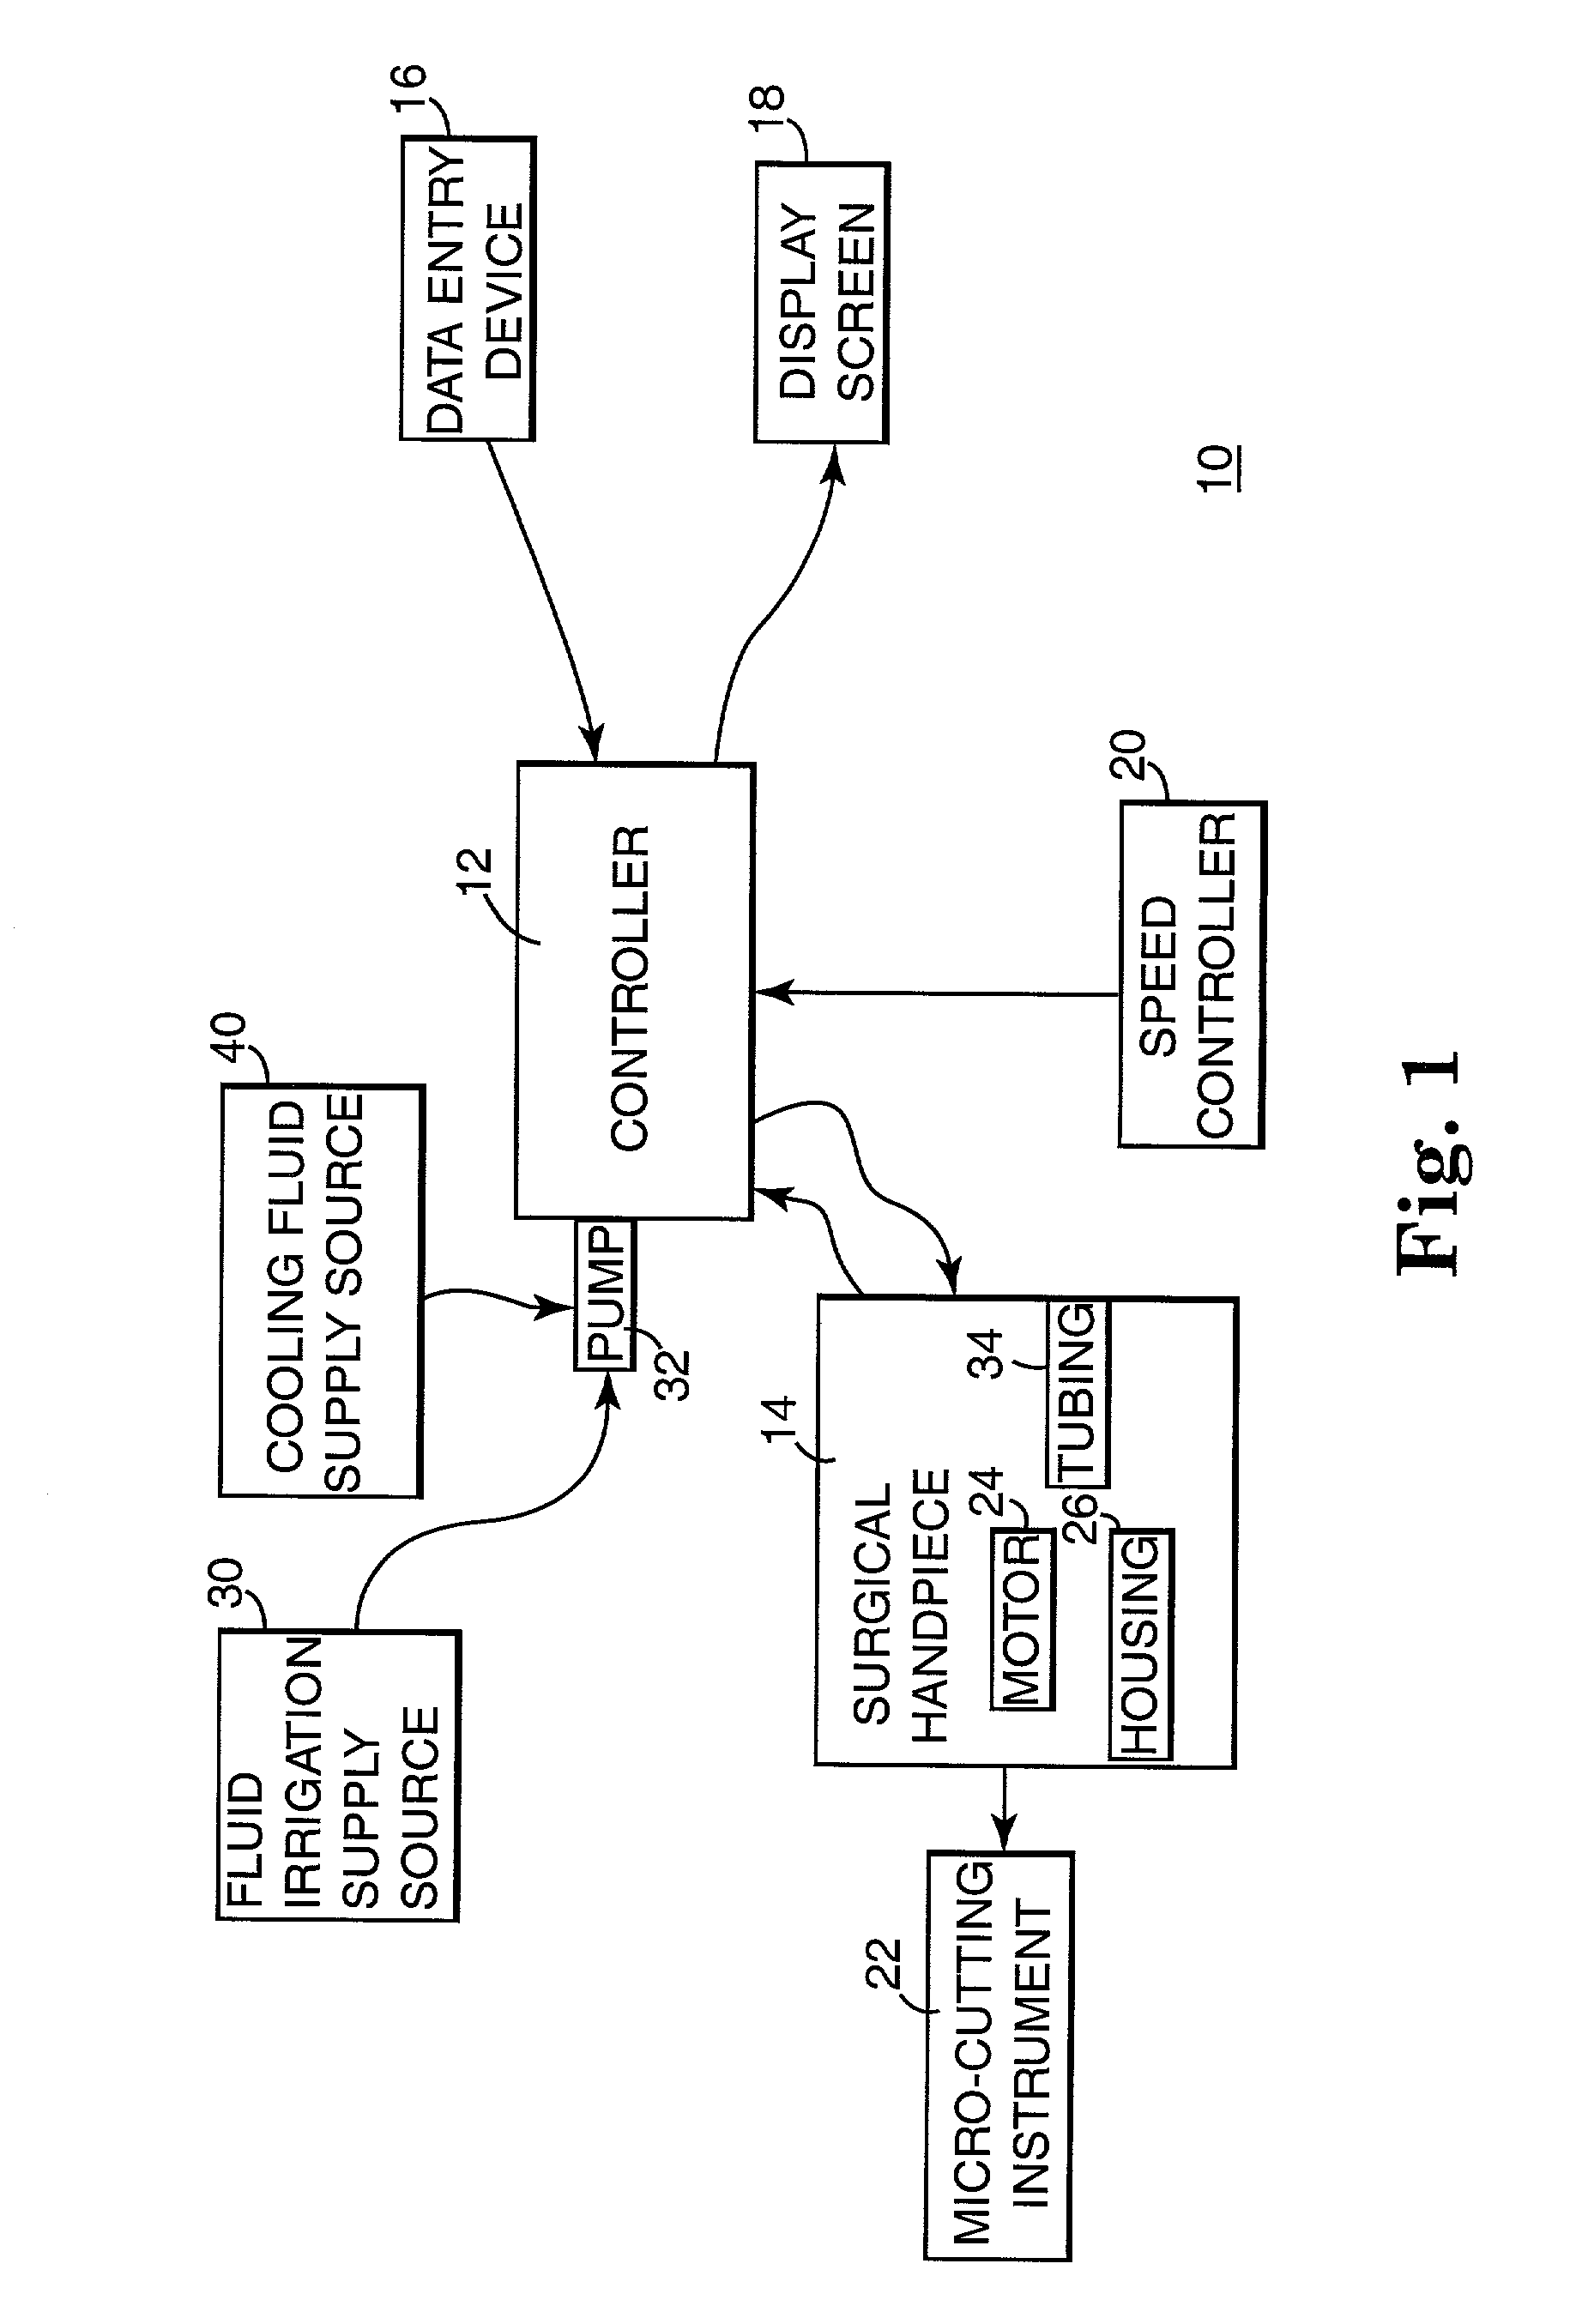 Motor control system for a surgical handpiece